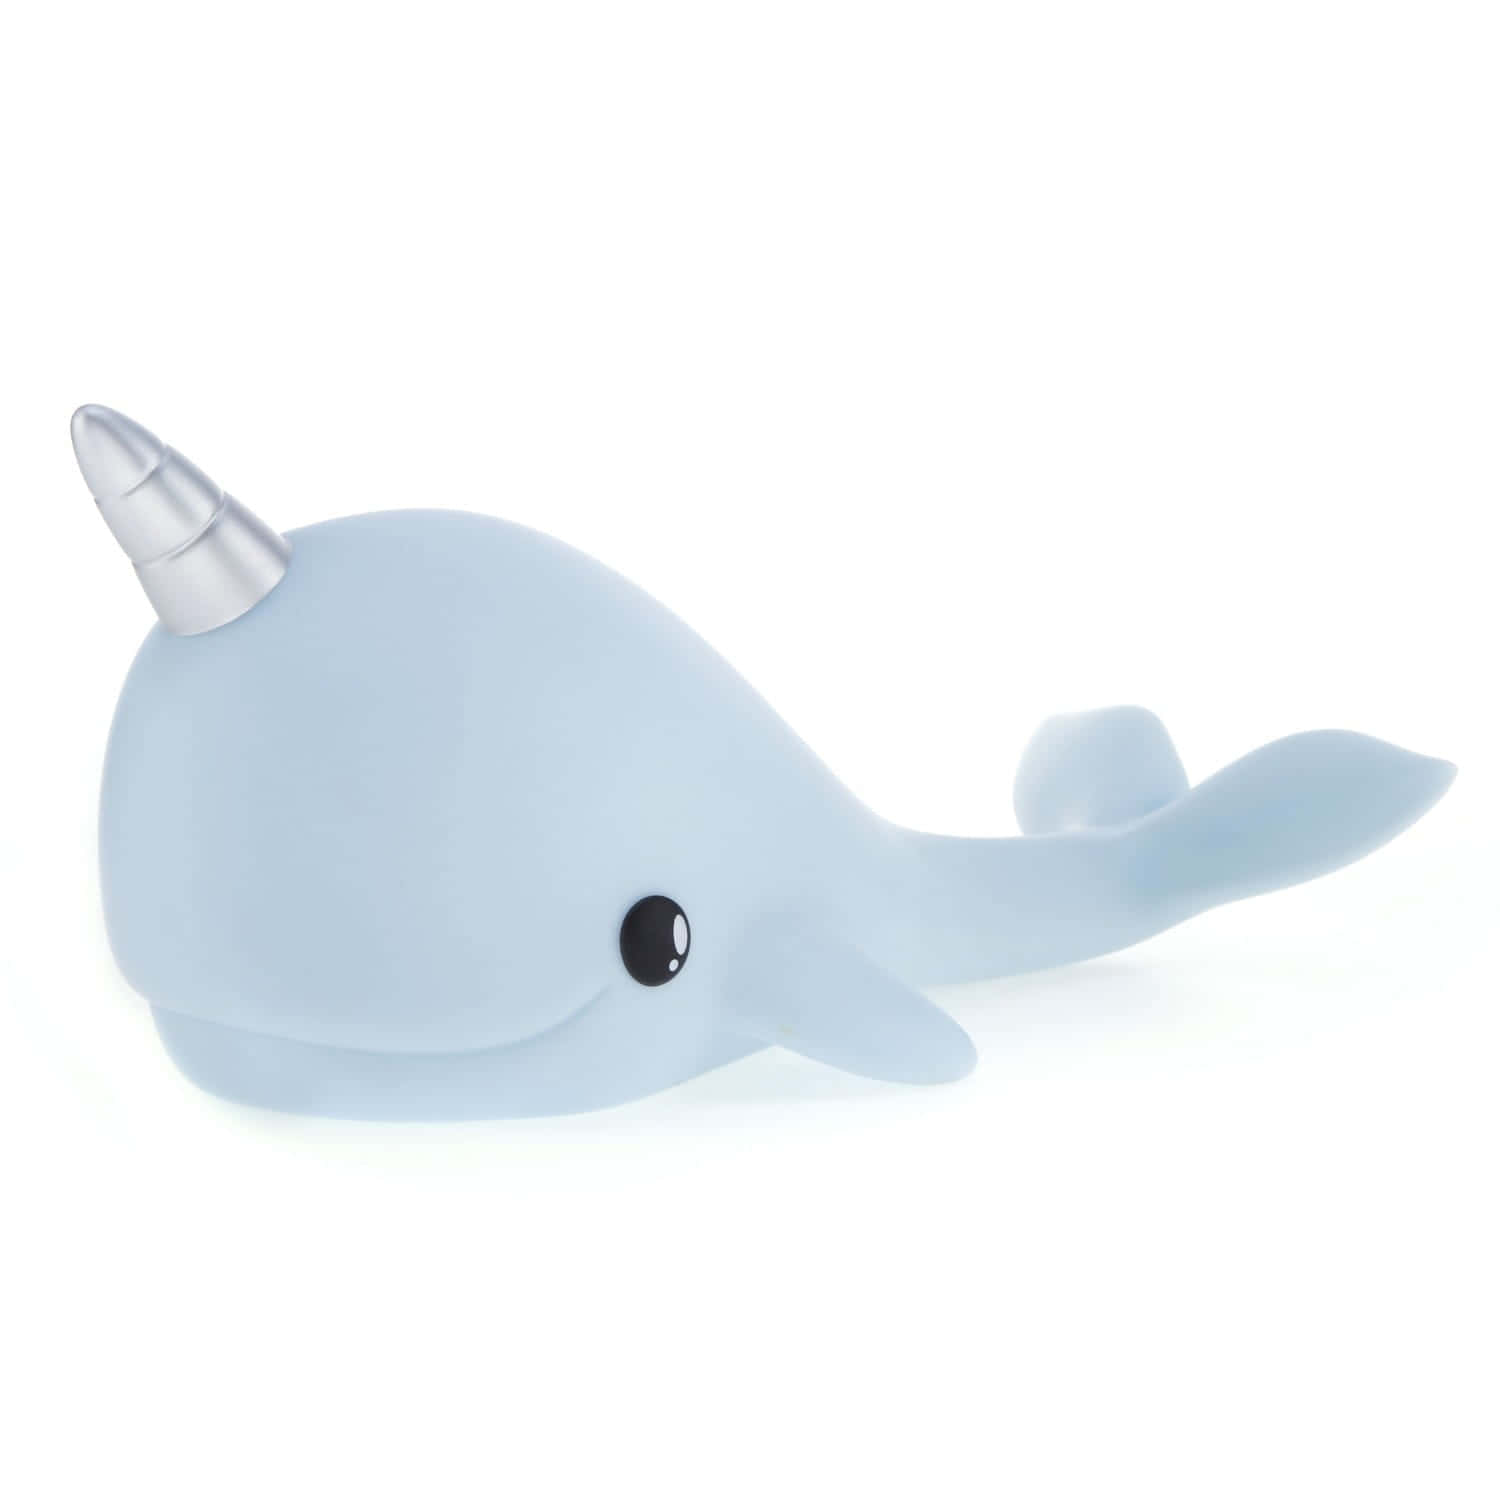 A Mysterious Narwhal Drifts Through the Ocean